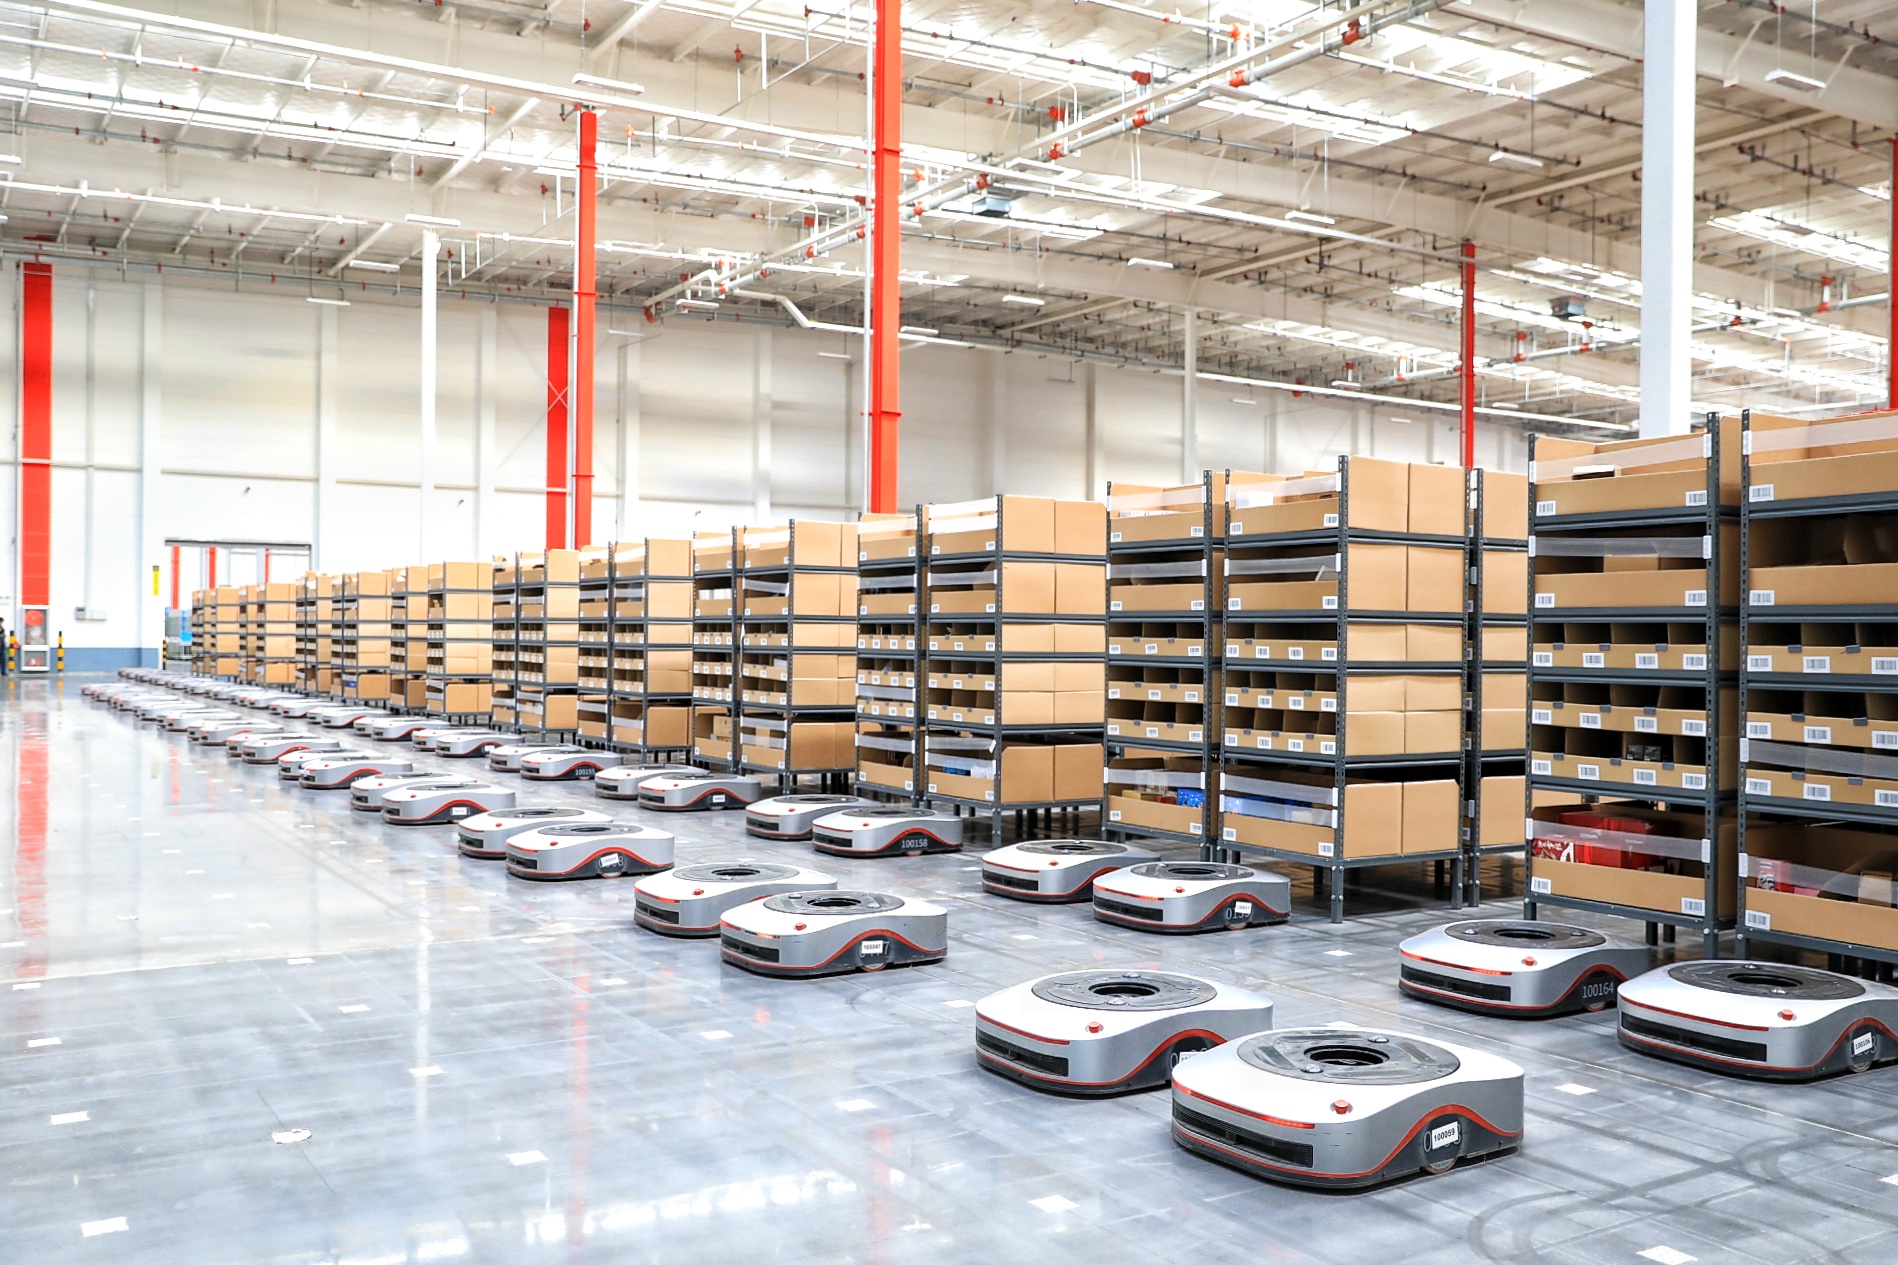 “The unmanned warehouse of JD Logistics is undoubtedly a model of integrating industries and research that requires both theory and domain know-how,